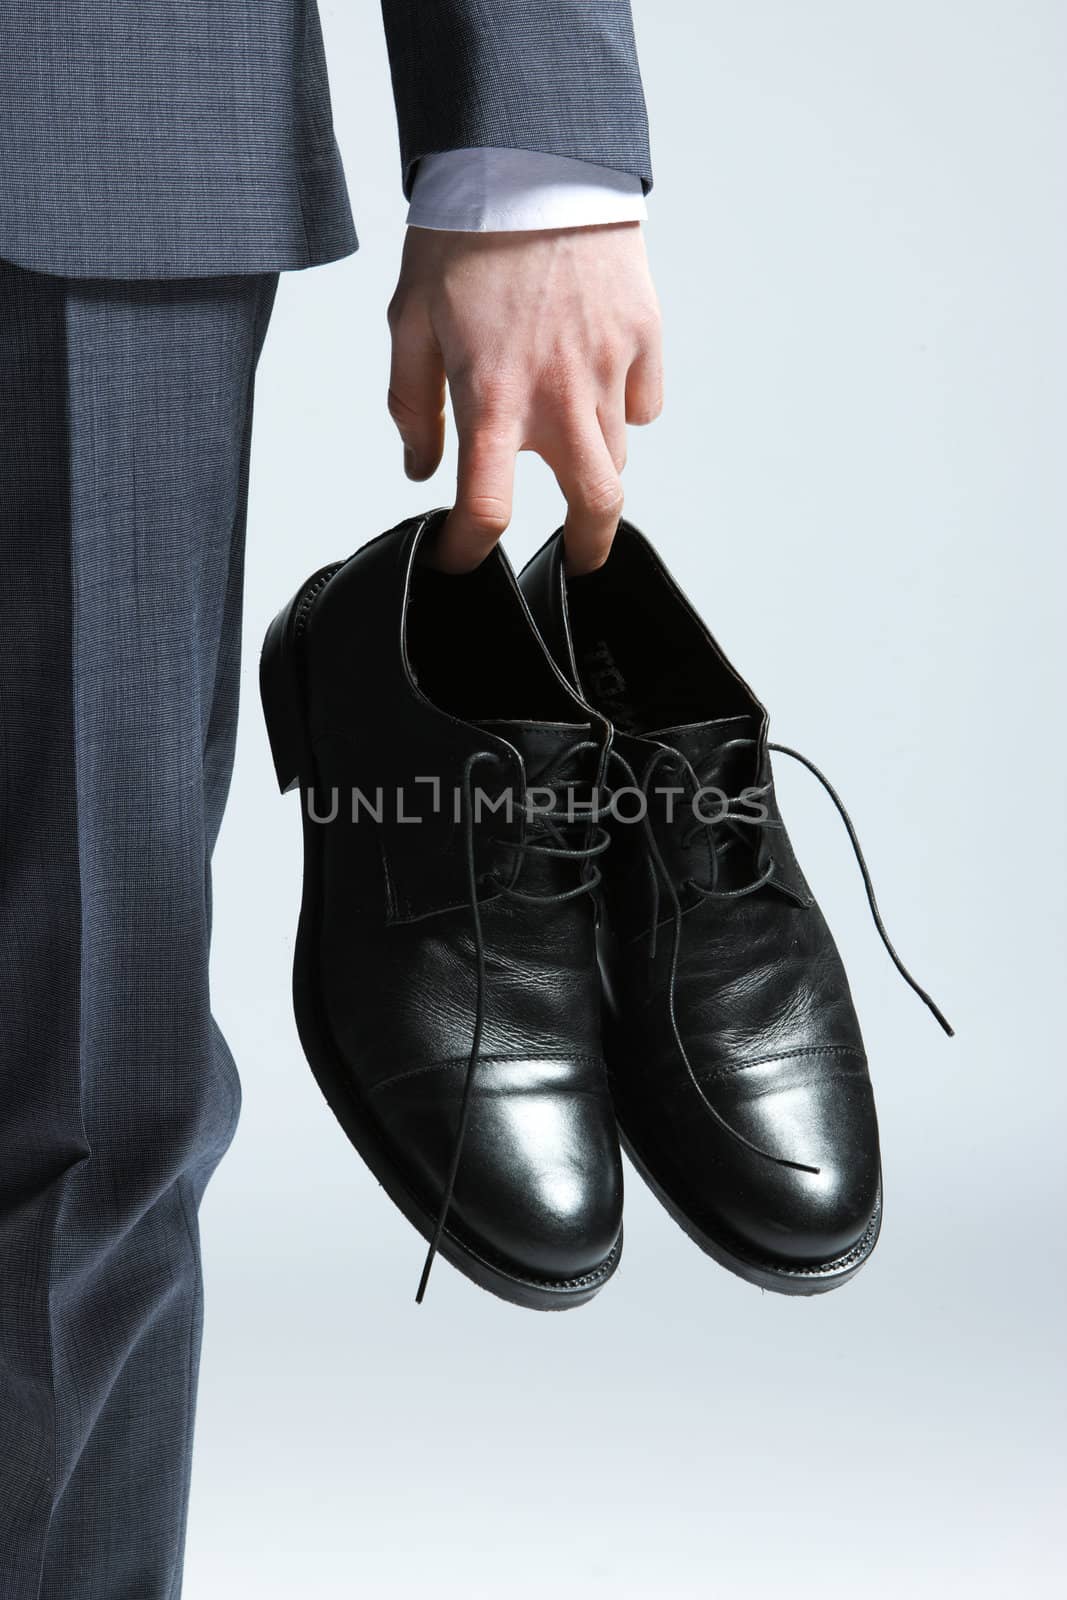 businessman holding the shoes in hand, close up by stokkete